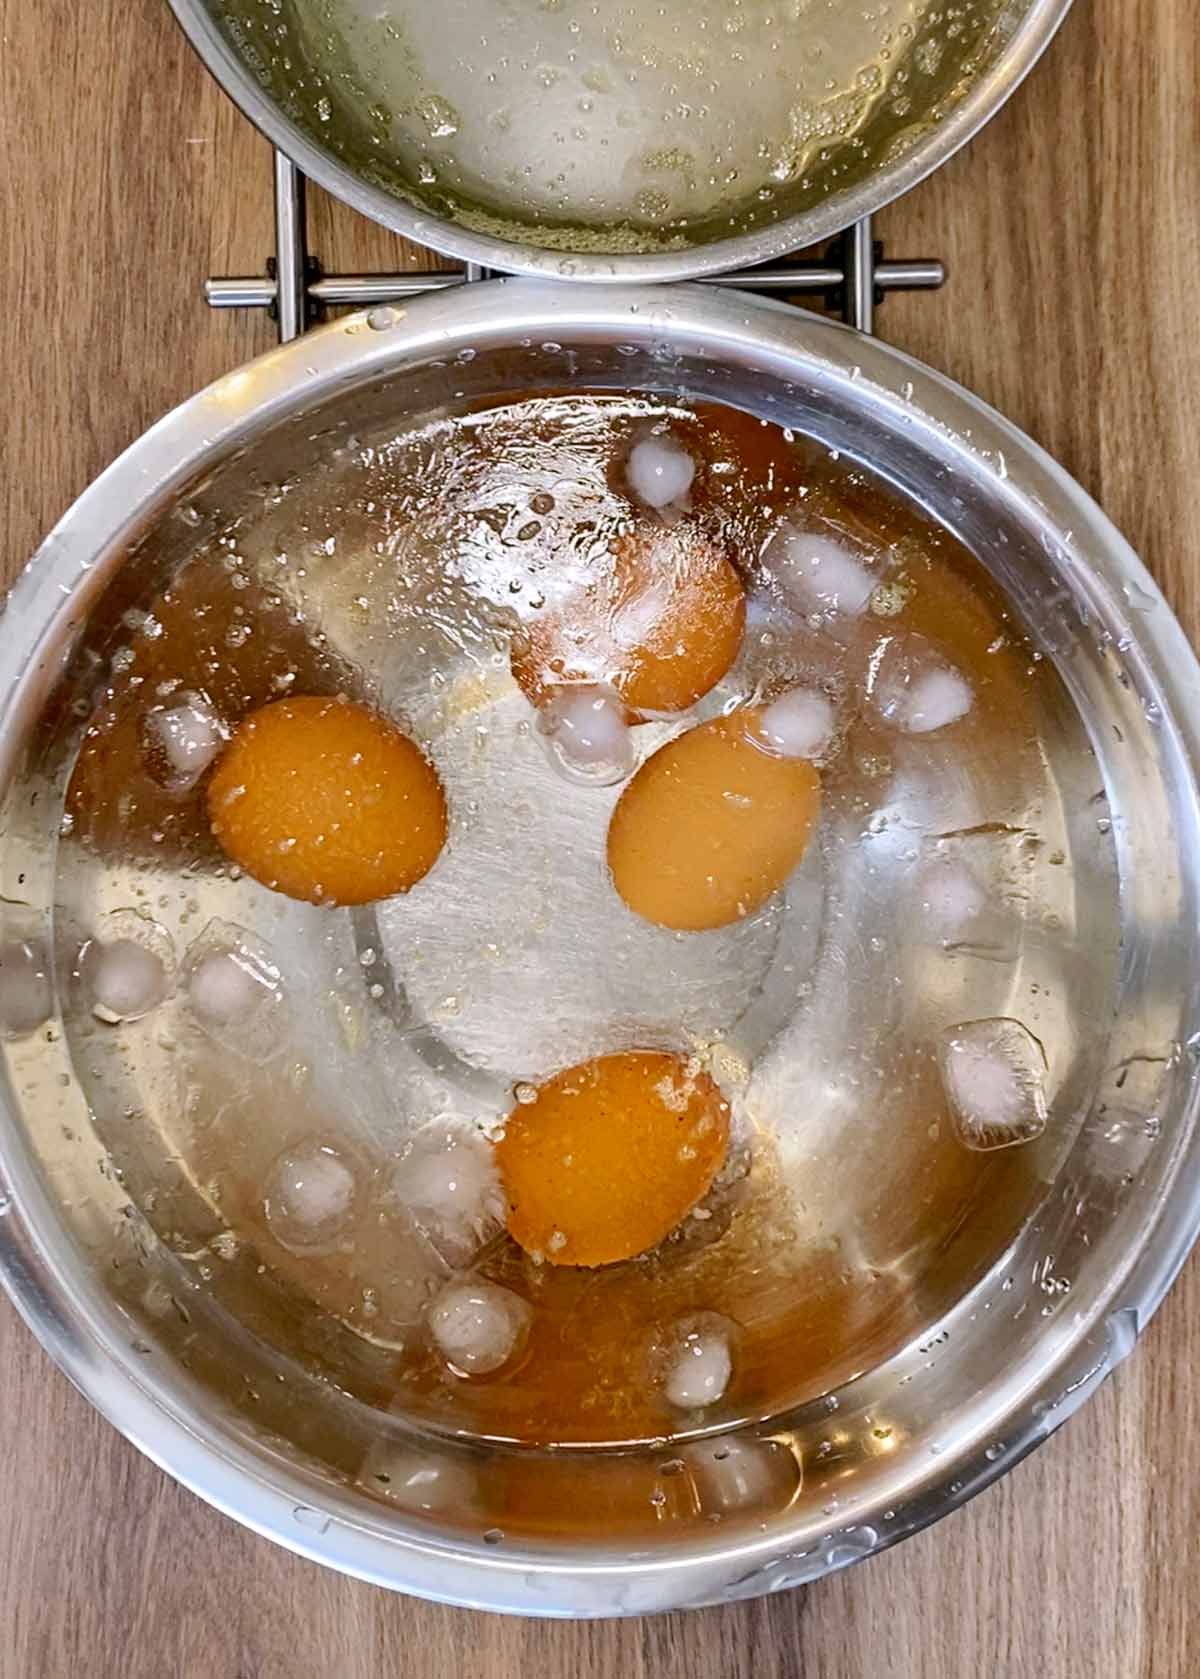 Boiled eggs in a bowl of iced water.